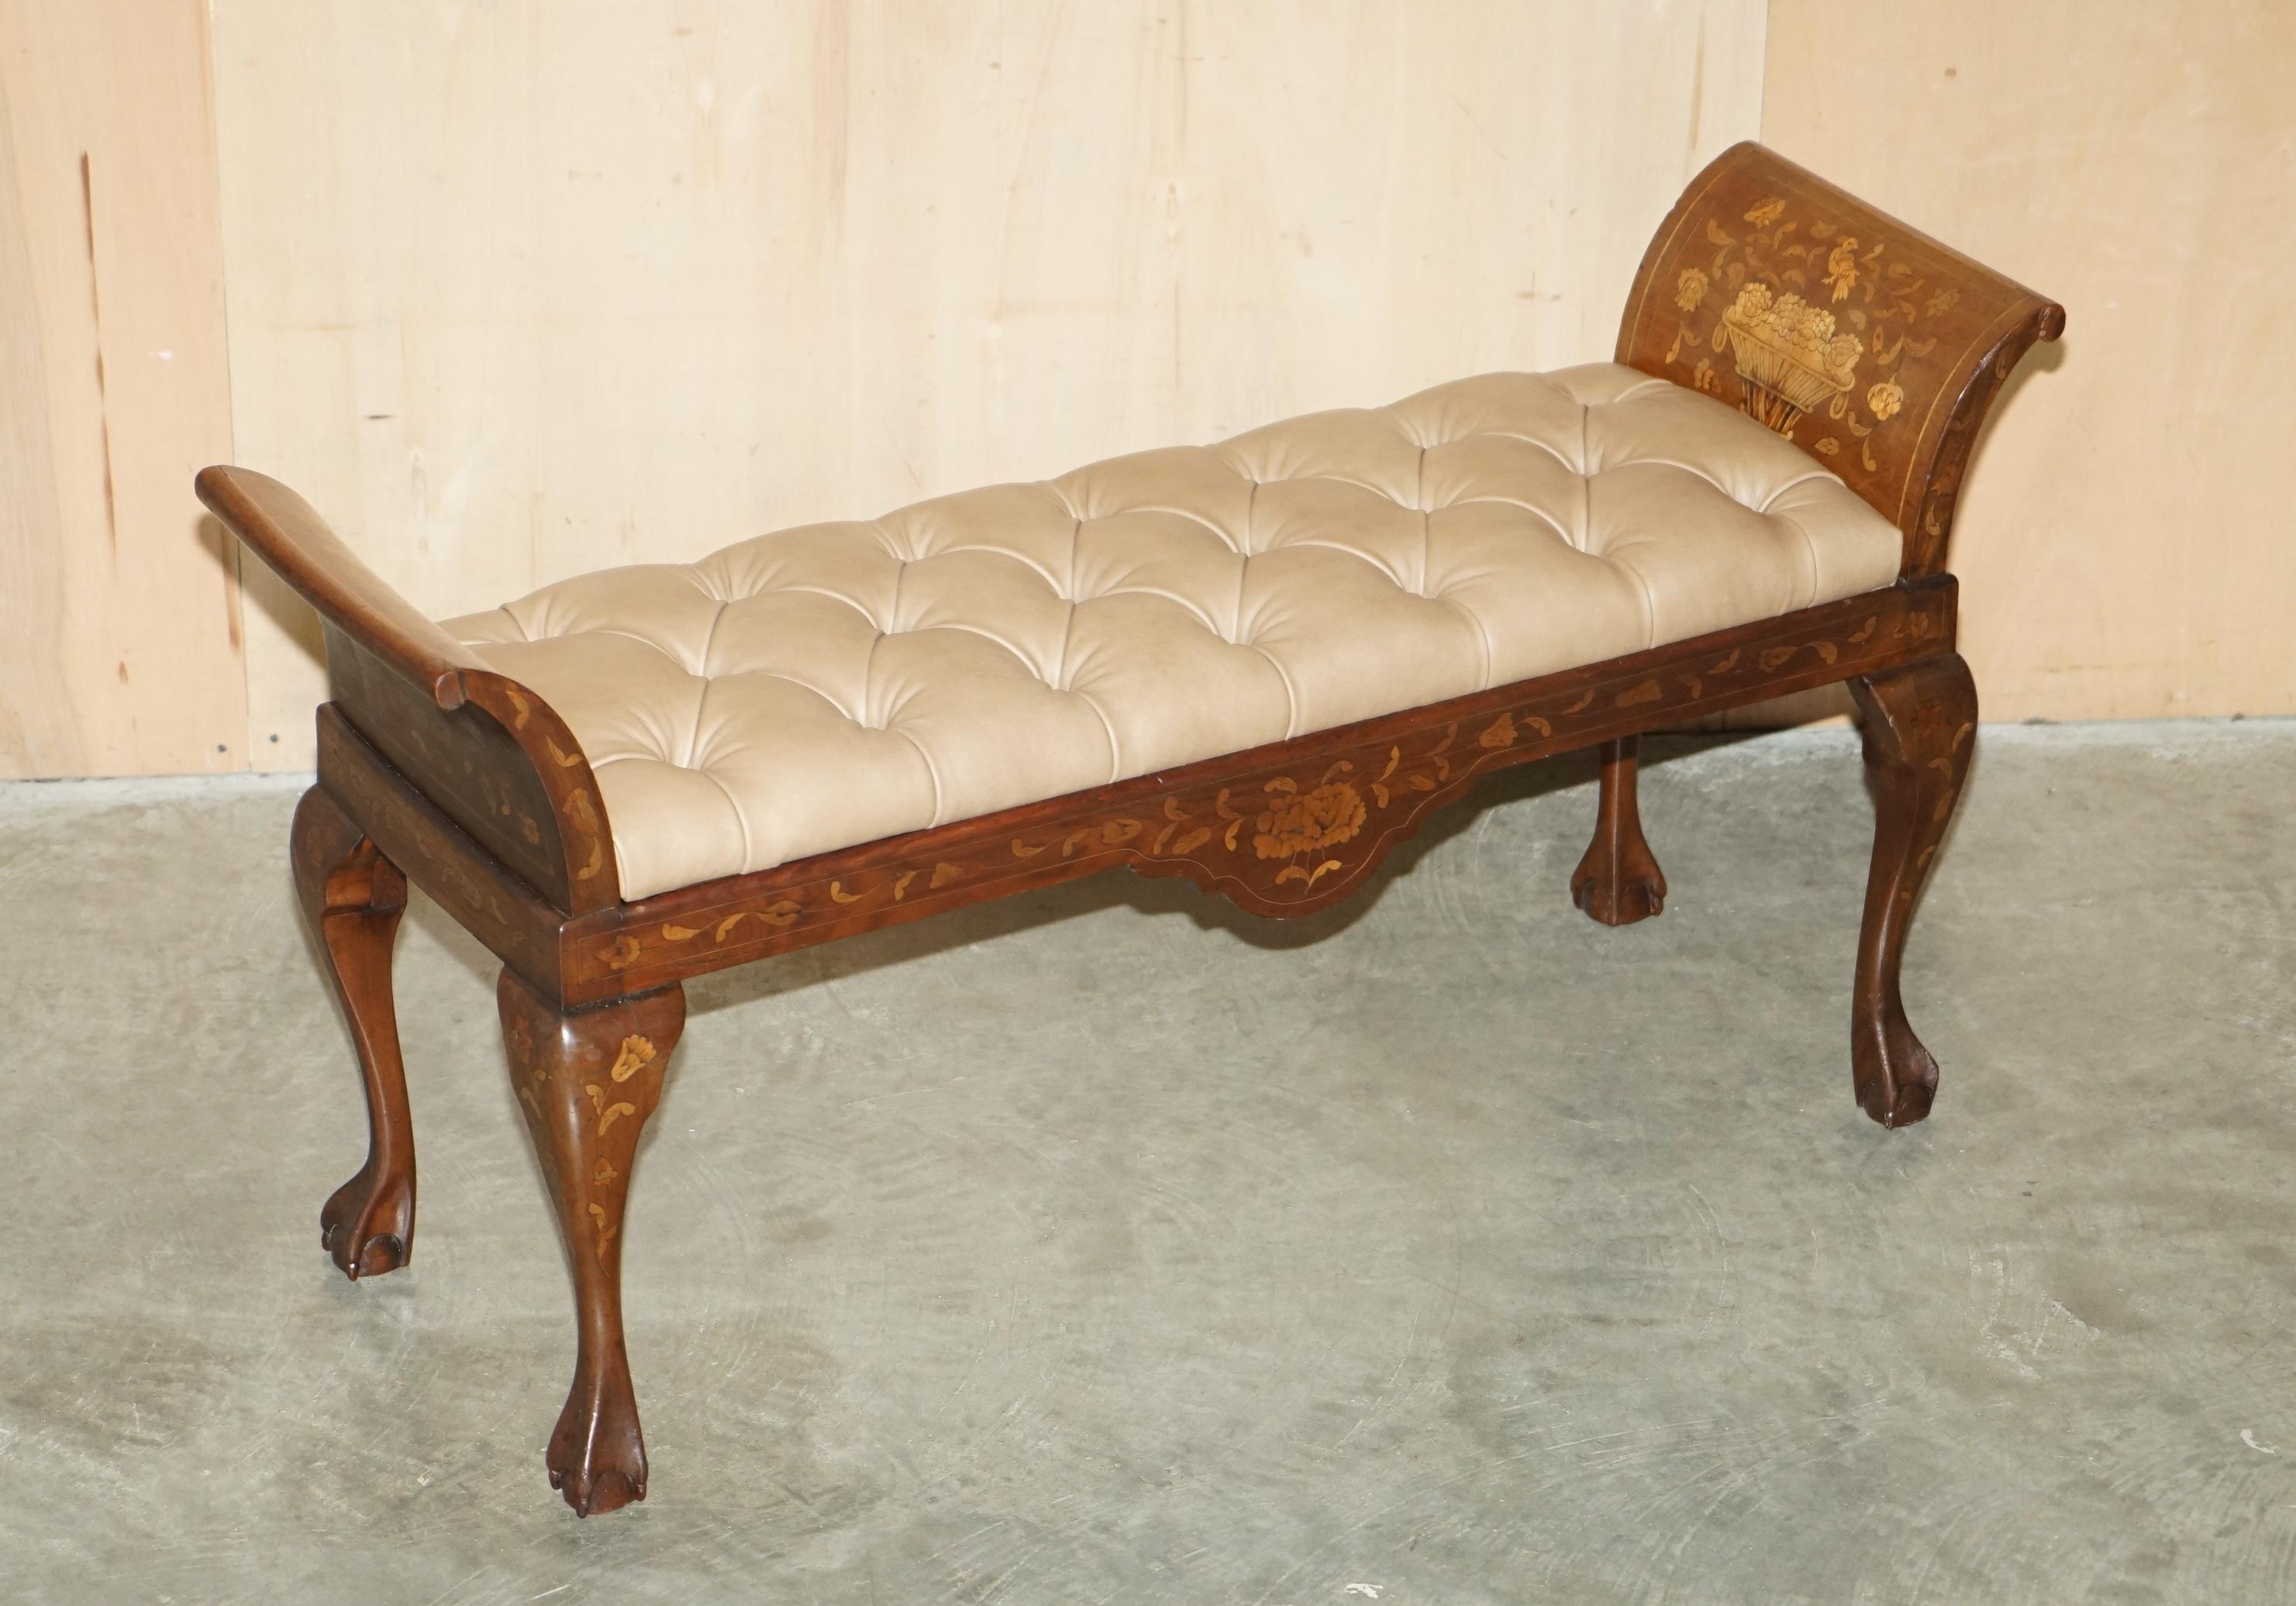 Royal House Antiques

Royal House Antiques is delighted to offer for sale this very fine highly collectable antique circa 1860 Dutch Marquetry inlaid, Claw & Ball feet, brown leather seat pad, window seat of bench 

Please note the delivery fee